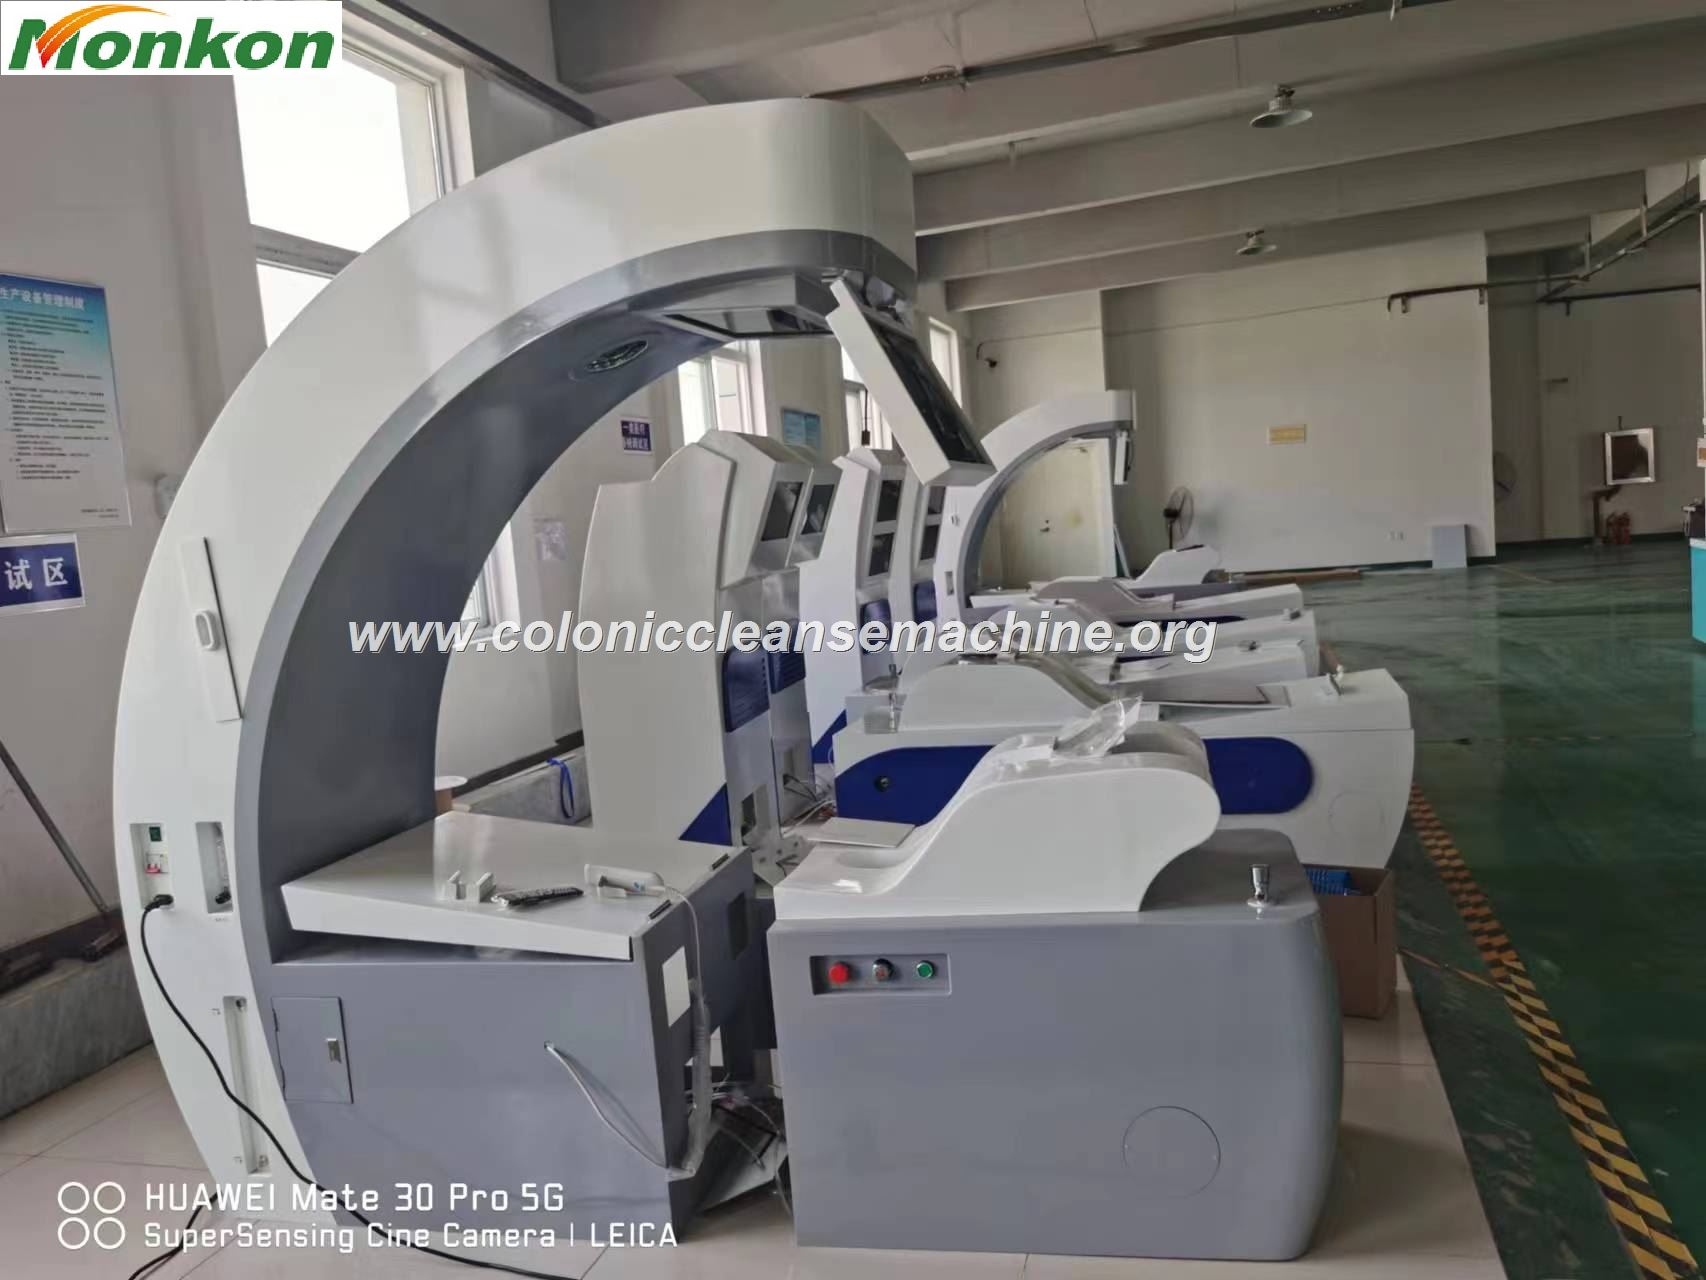 Used Hydro Colon Therapy Machines for Sale Professional